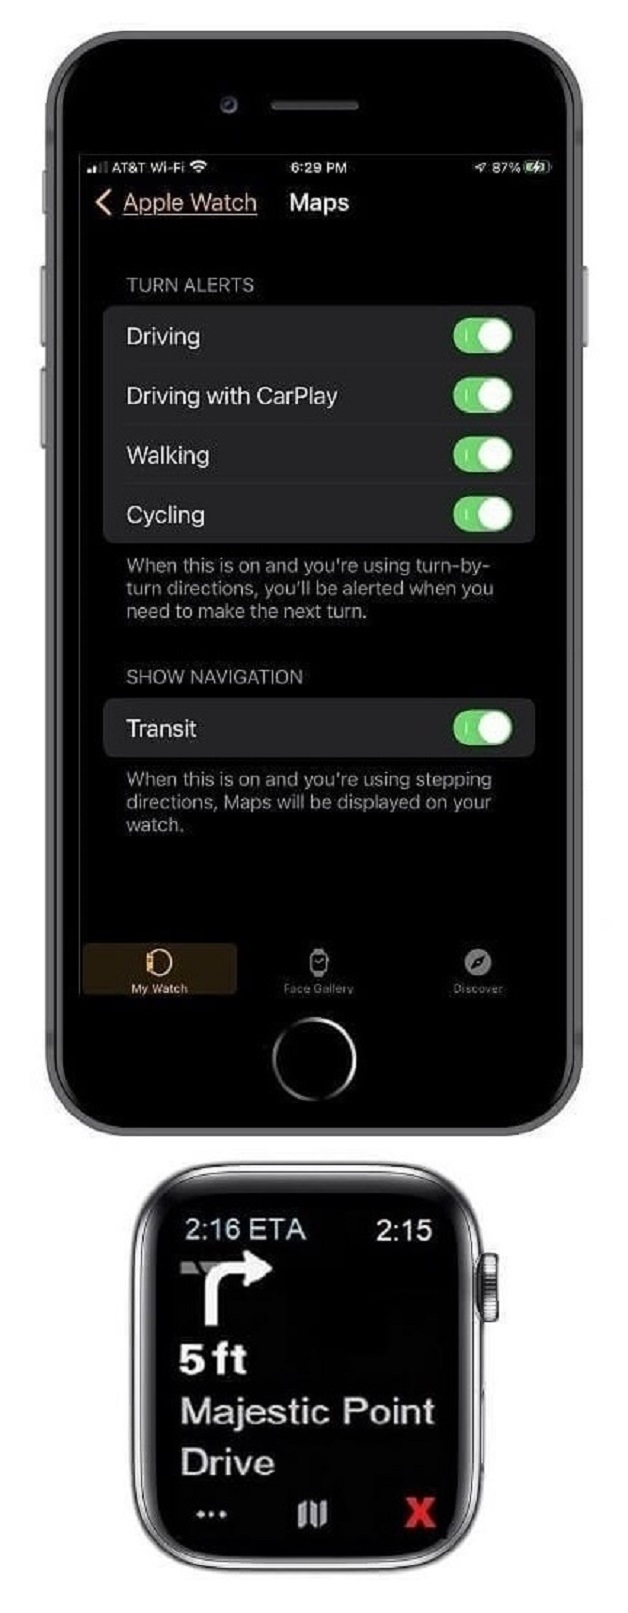 Apple ⌚ Watch Maps App Settings to receive driving notifications on the small screen